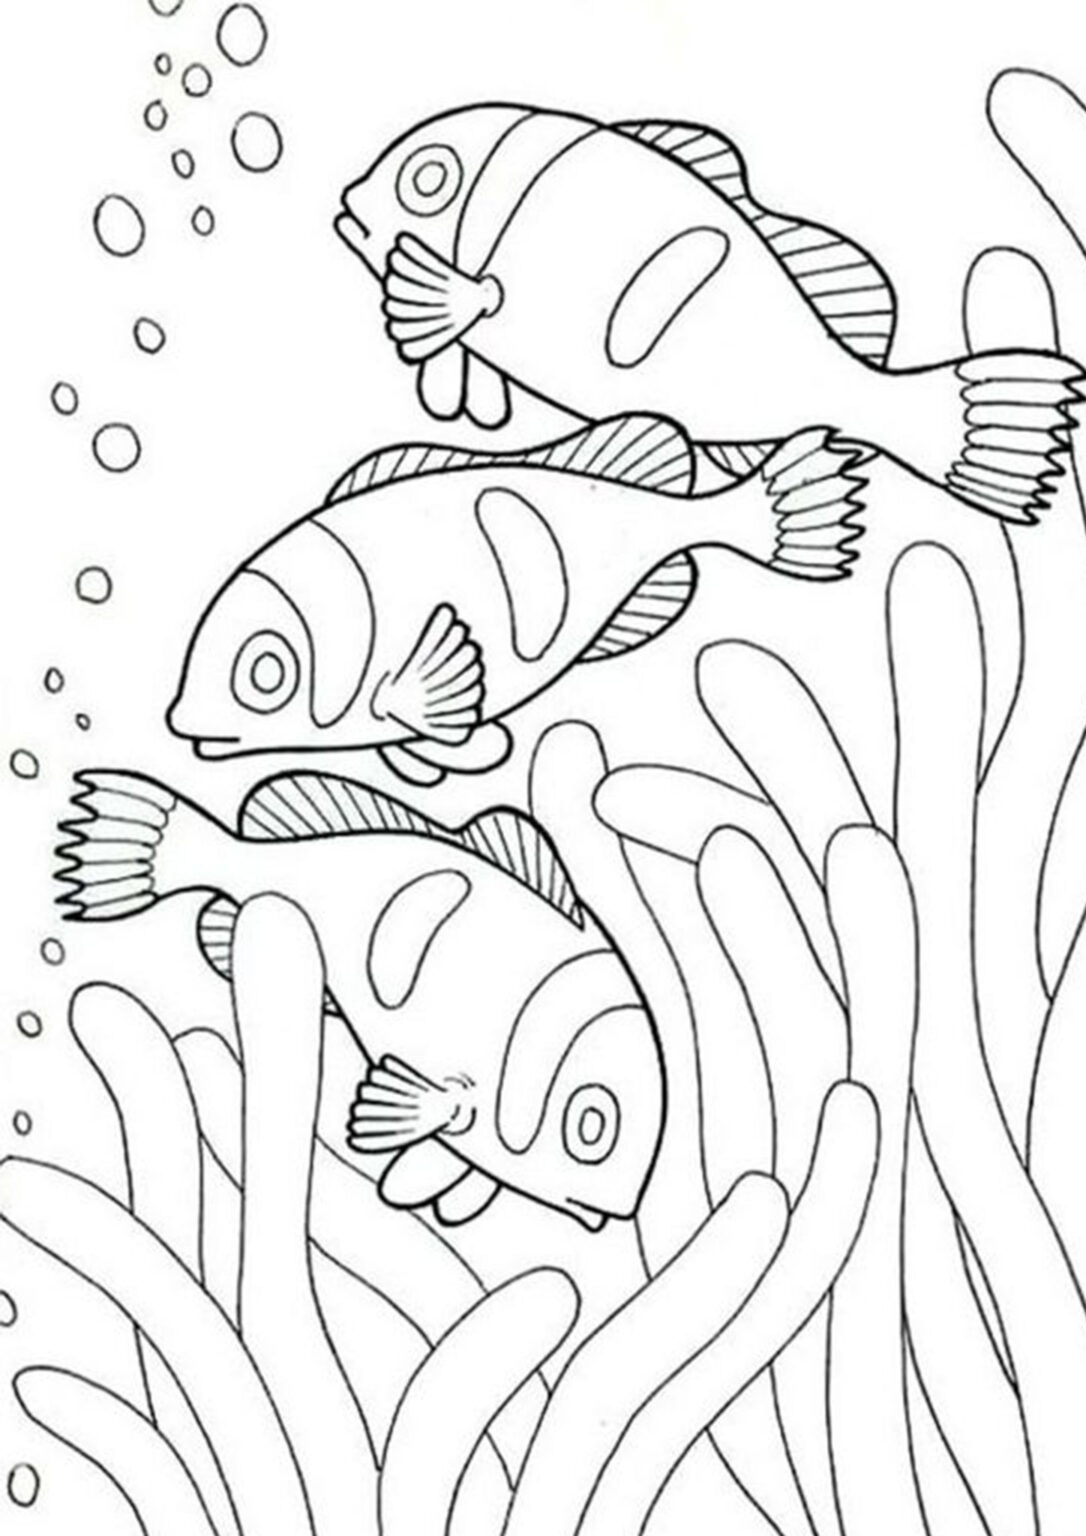 free-easy-to-print-fish-coloring-pages-easy-coloring-pages-fish